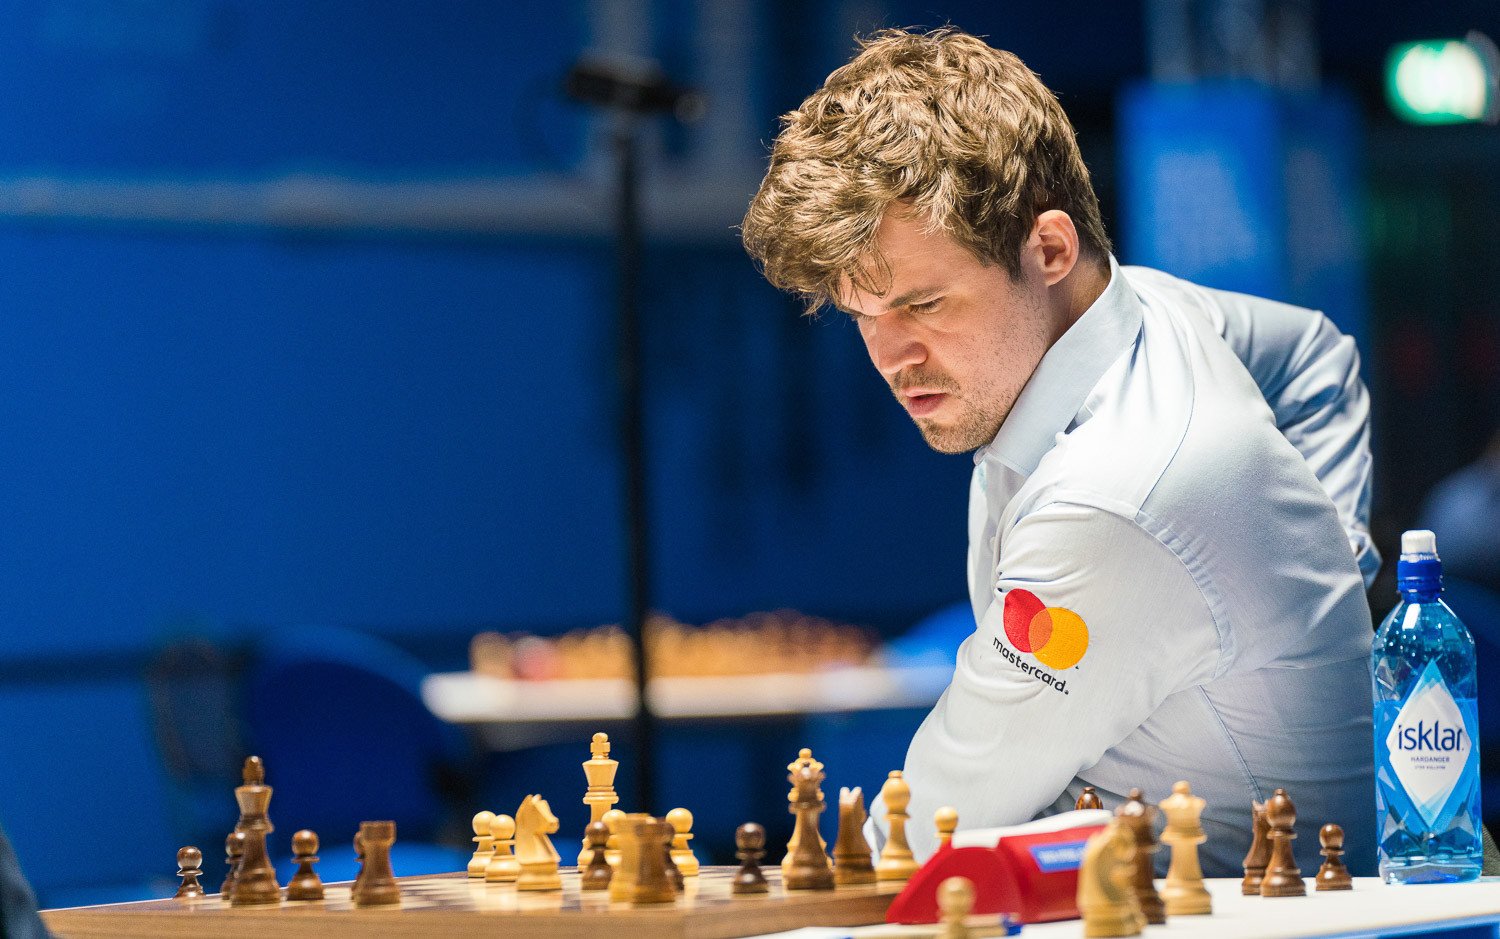 Tata Steel Chess on X: German Grandmaster Alexander Donchenko returns to  the Masters for his 2nd appearance after a victorious run in the 2023  Challengers in January. After previously competing in 2021